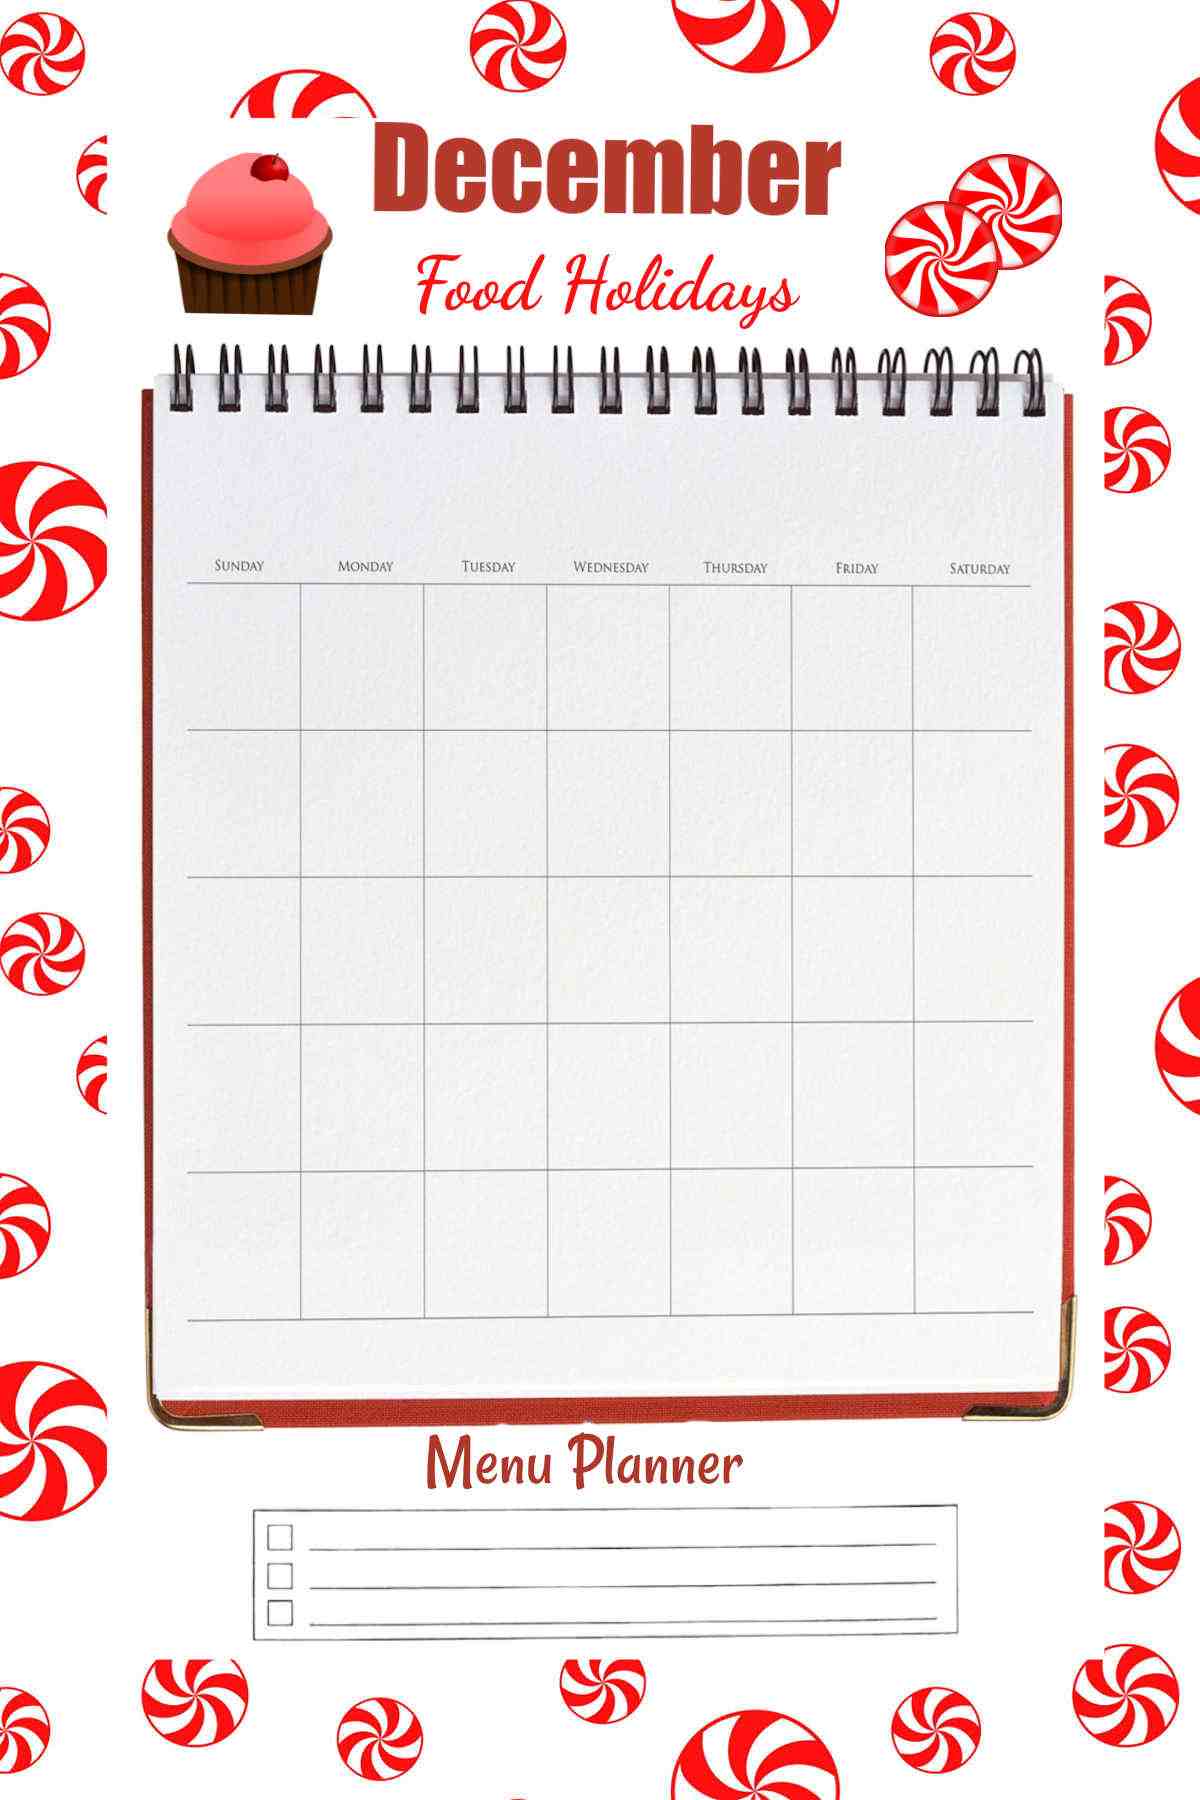 Peppermint candy background with words December Food Holidays Menu Planner.